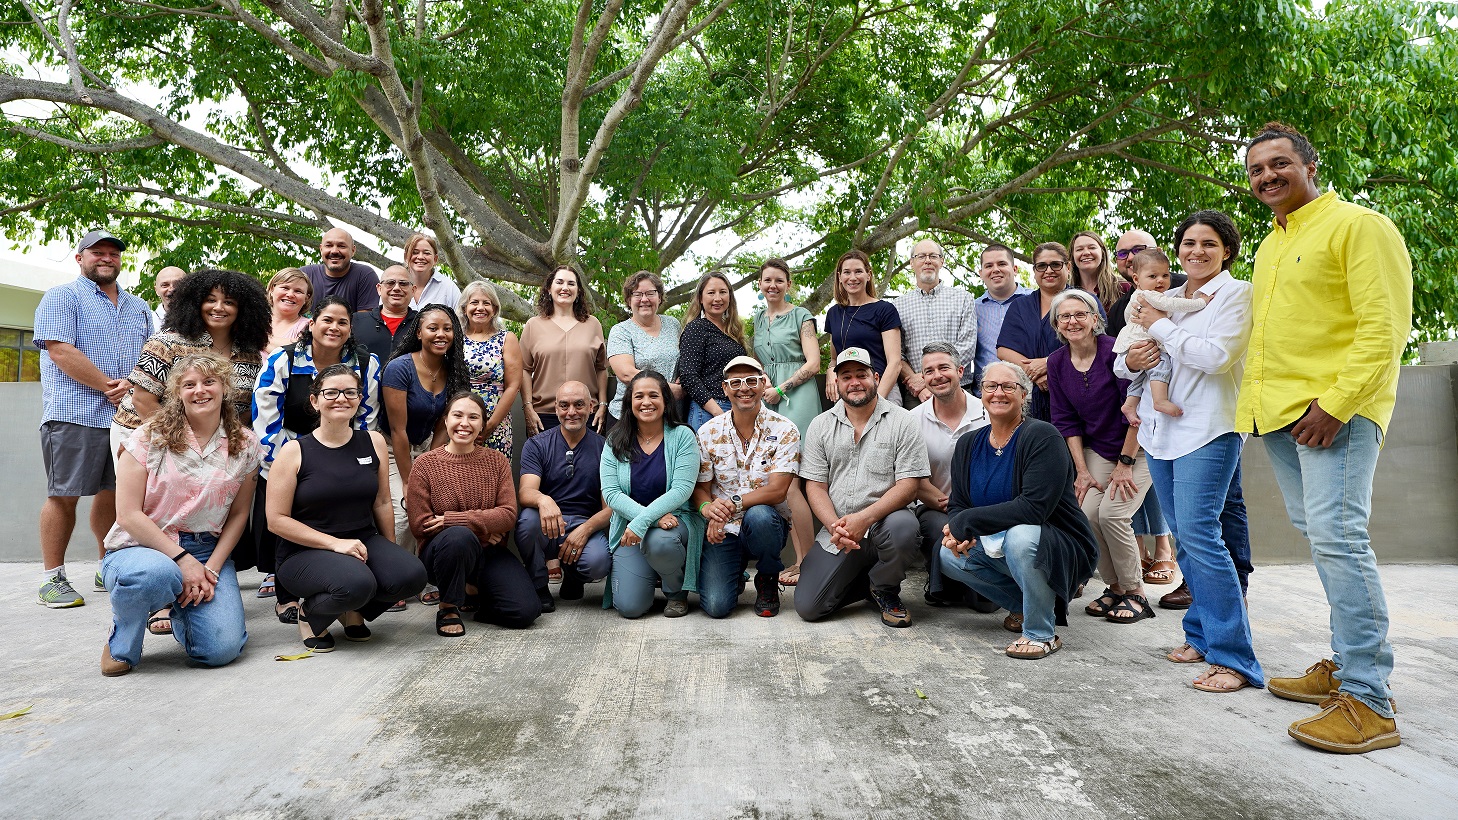 Group photo of meeting attendees in front of a large tree.